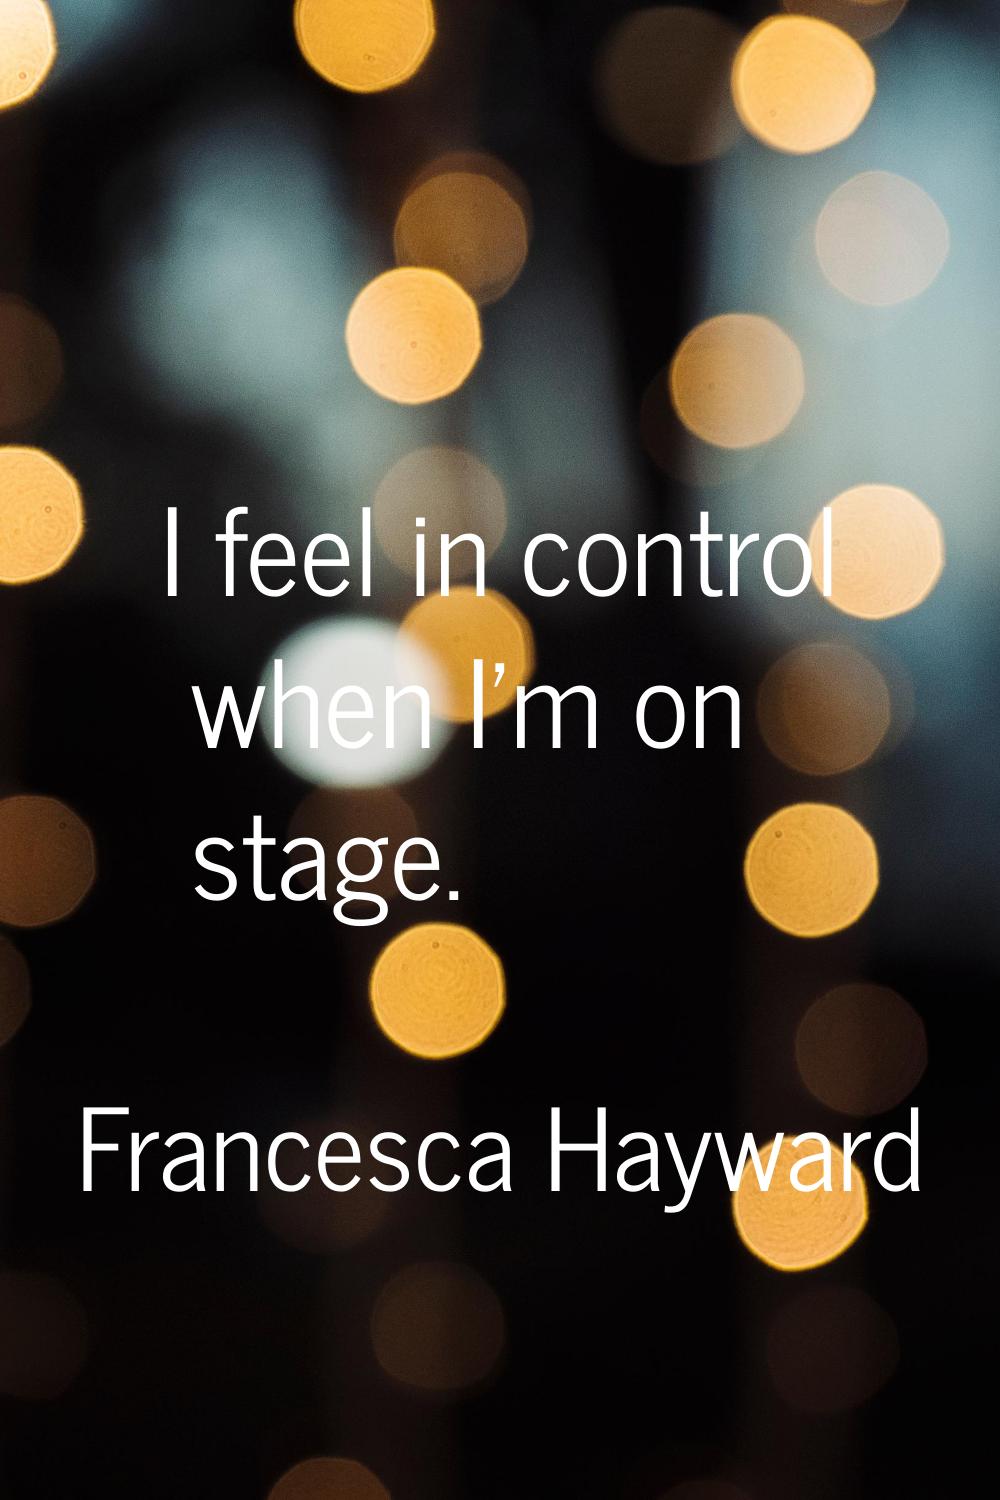 I feel in control when I'm on stage.